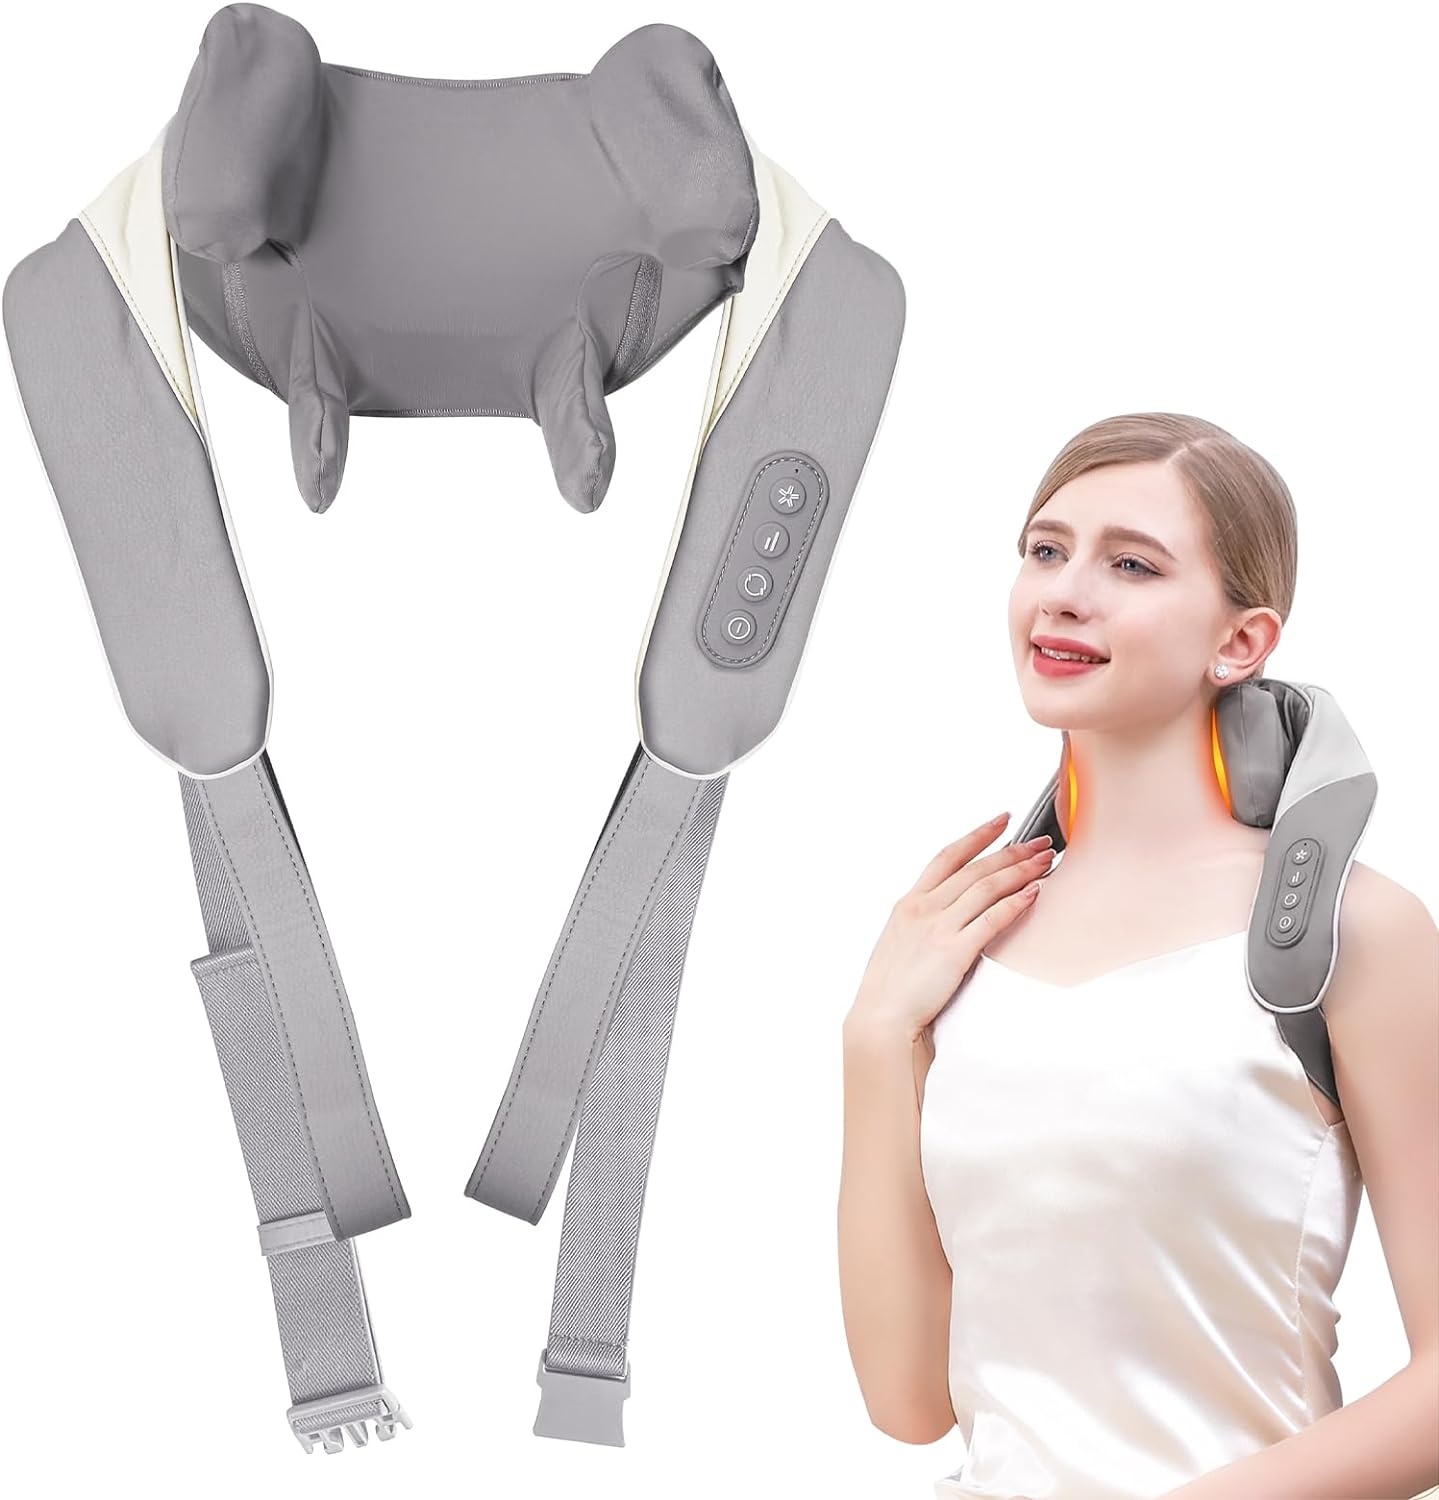 This review is for YAEIY Upgrade Wider Massager, Electric Kneading Neck Massager, Neck and Back Massager with Heat for Pain Relief Deep Tissue, Neck Massager Cordless for Women, Home, Office, and Car Use, BeigeI have a very thick neck, and find that a lot of massagers of this type are too narrow. This one is better, but I would still like just a little more room. I would also like the loop handles/straps to be a little longer.Even so, this massager works wonders for me. It feels amazing. My wi